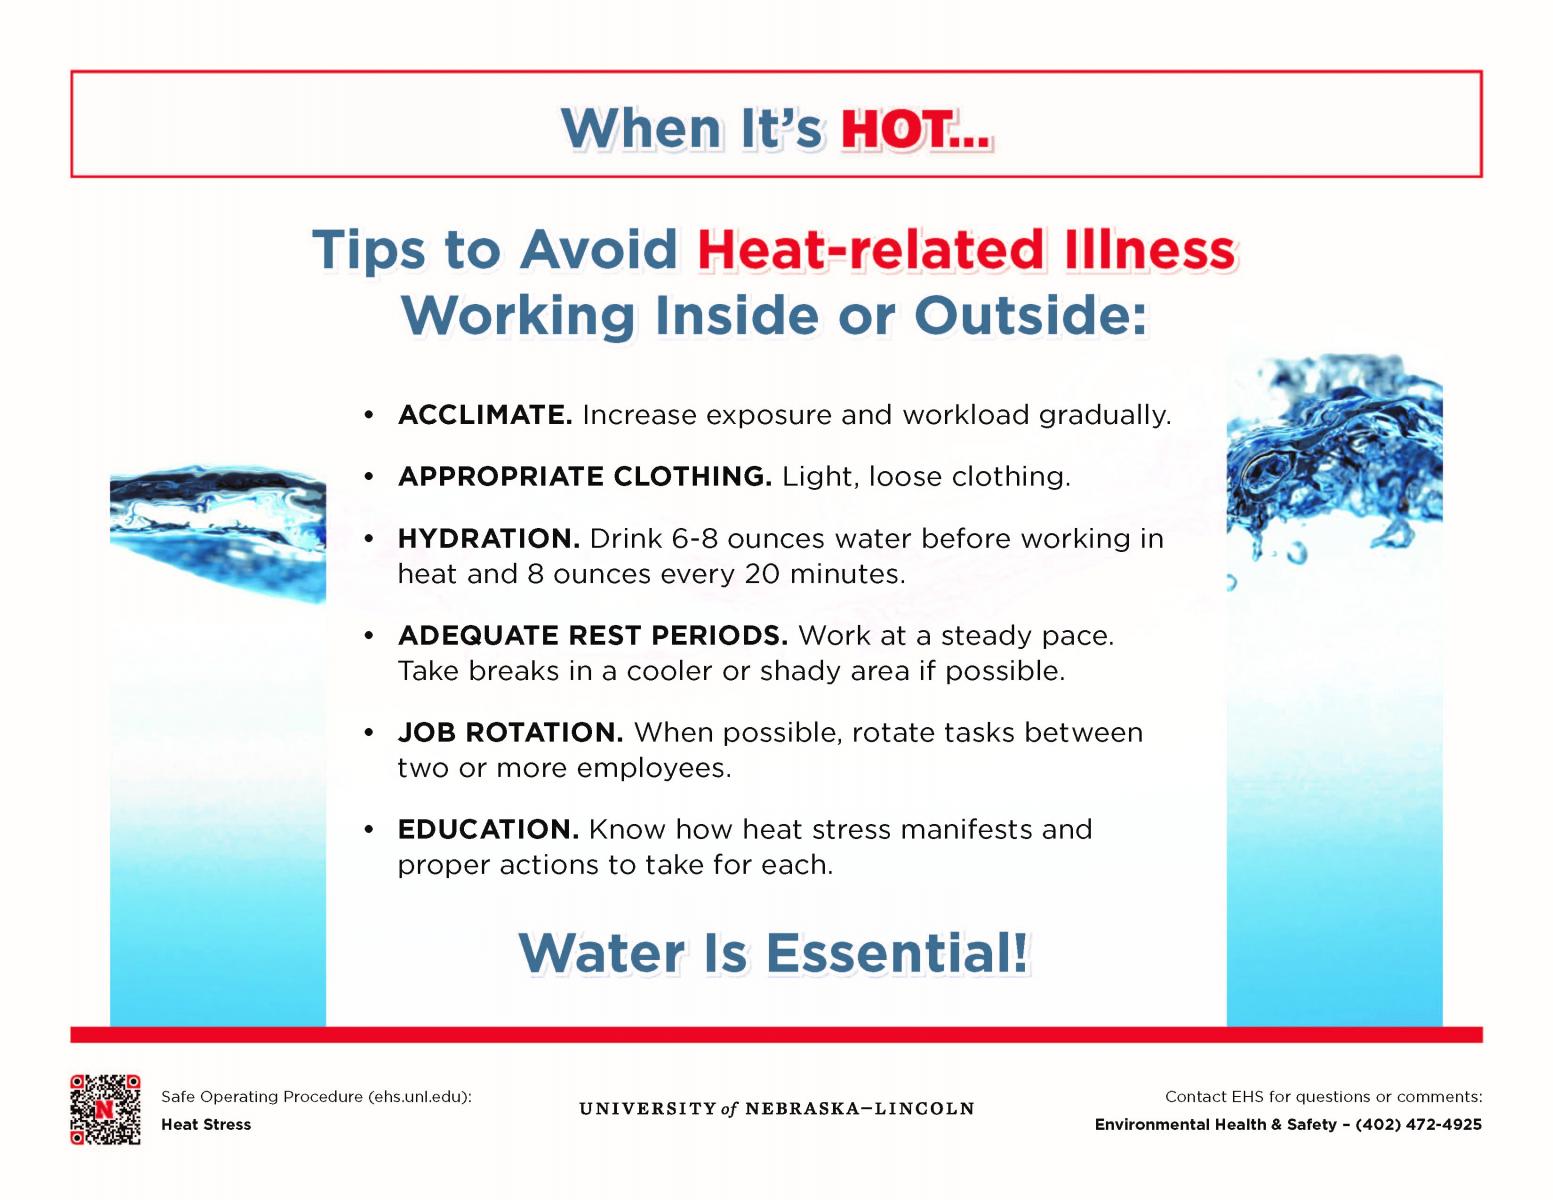 Poster listing tips to avoid heat-related illness.